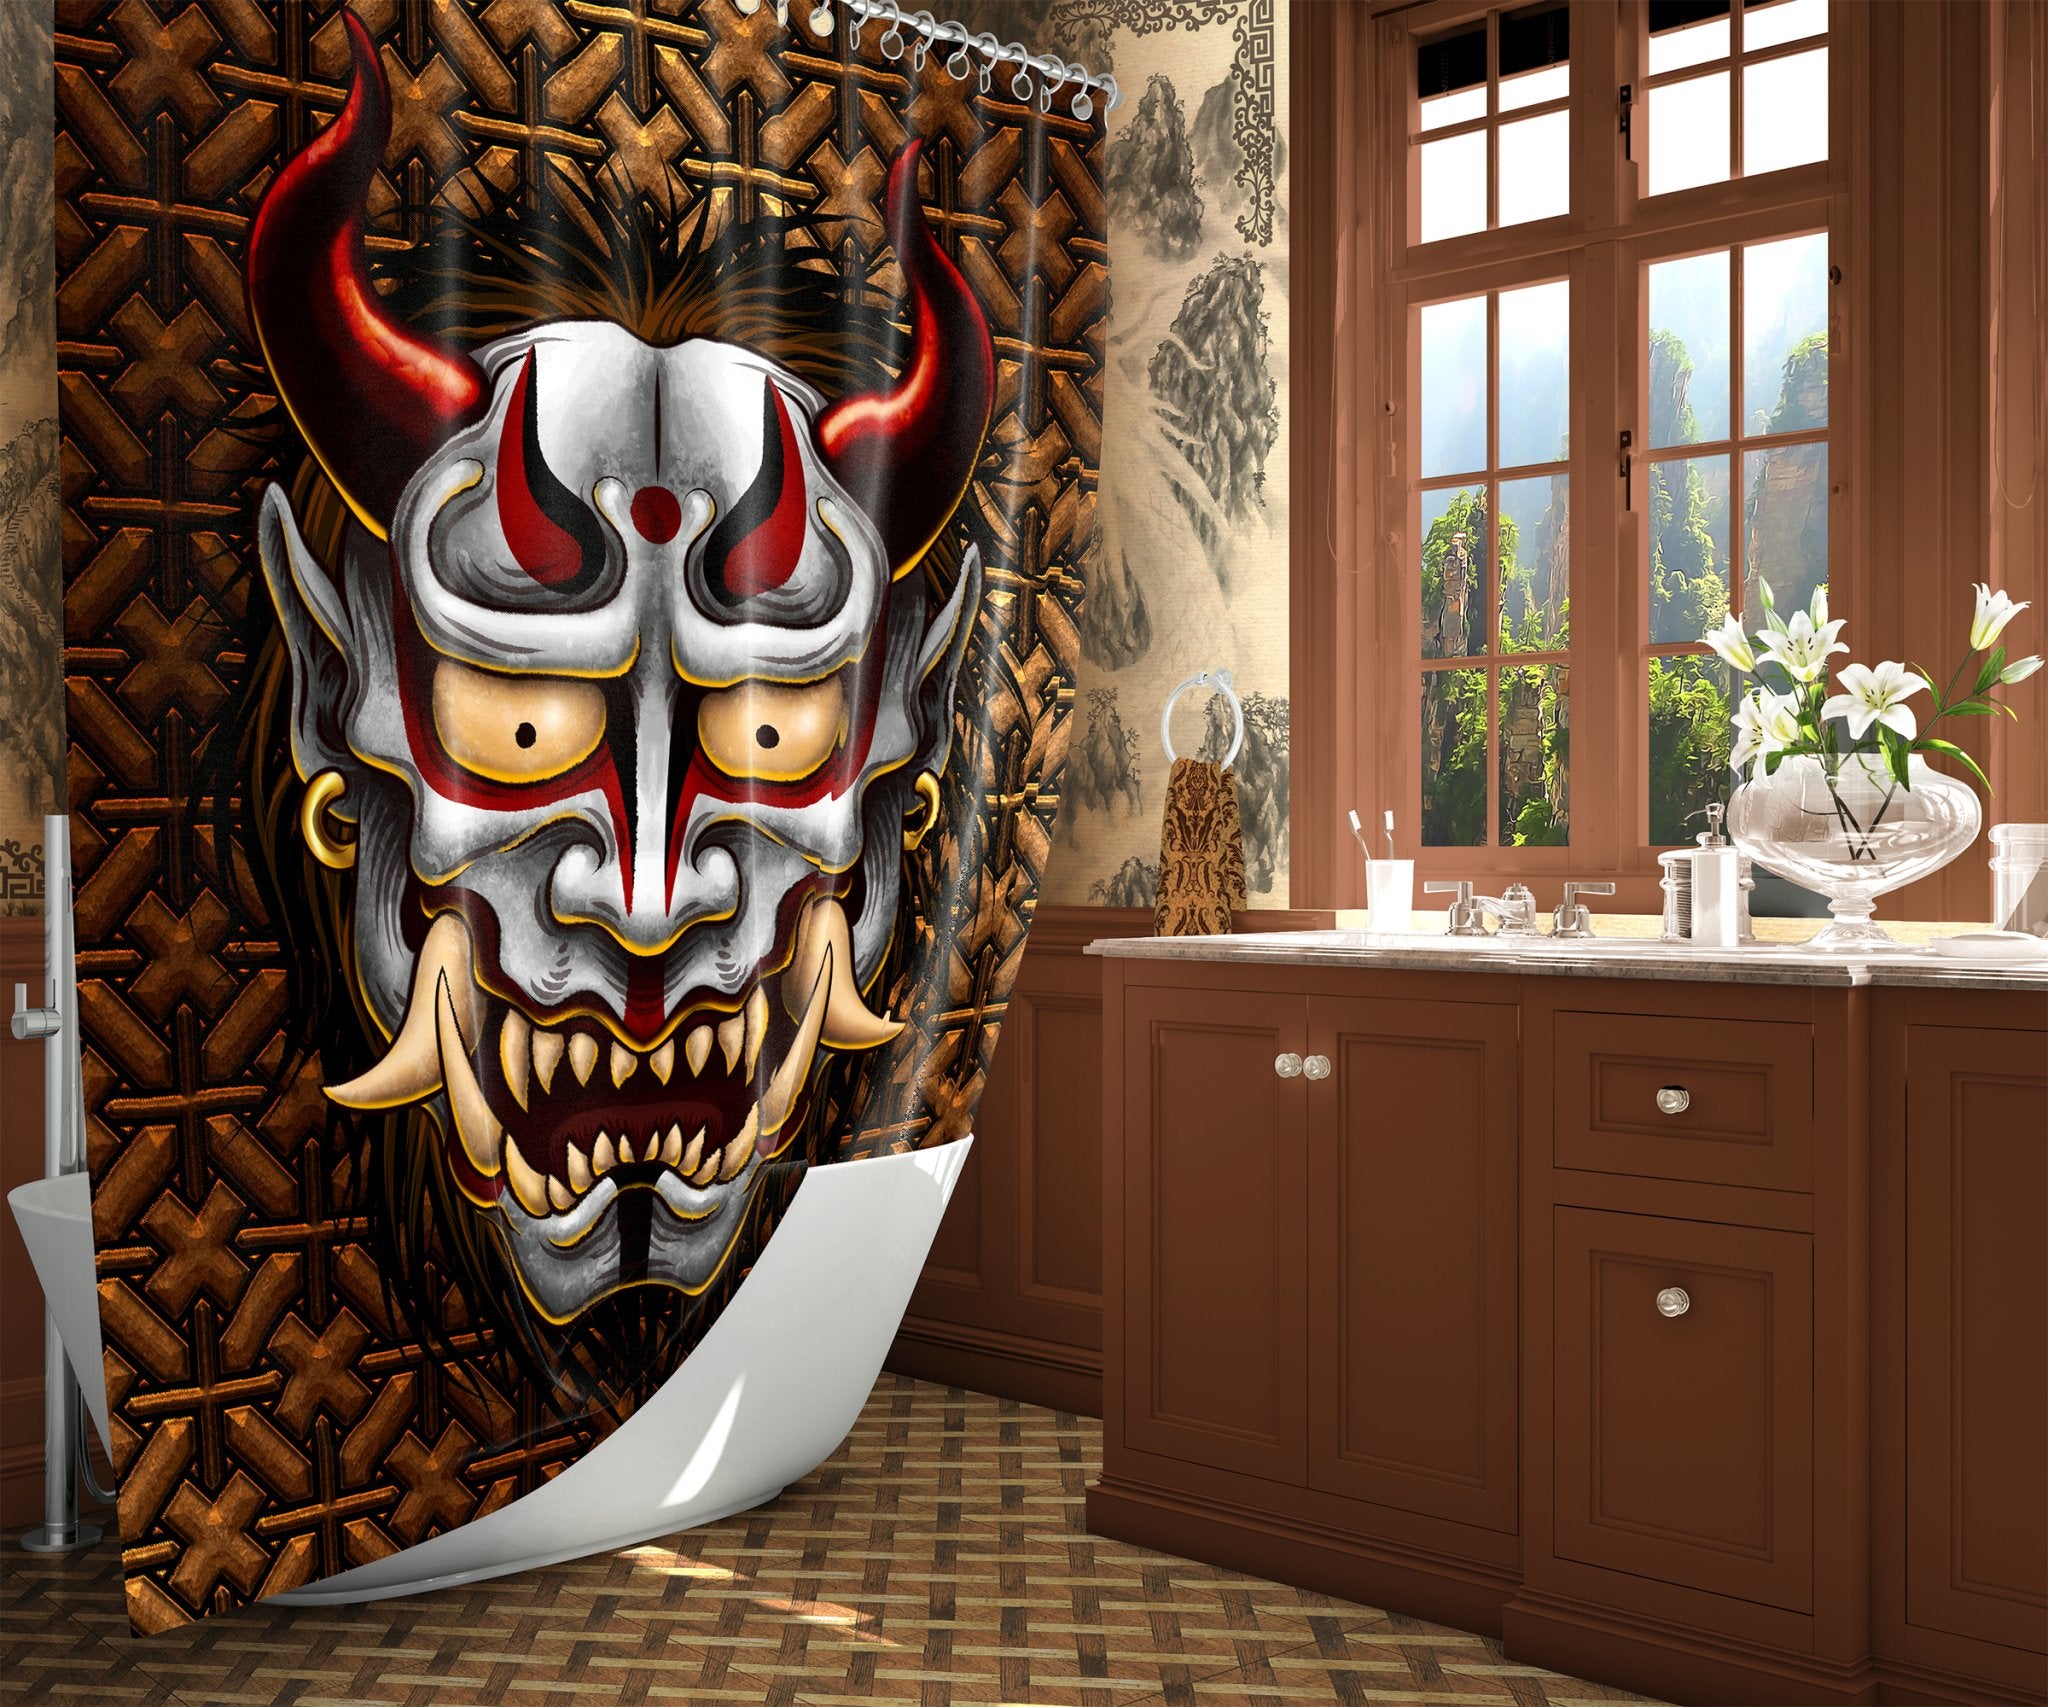 Oni Shower Curtain, 71x74 inches, Anime Bathroom Decor, Fantasy, Japanese Demon - Original Red or White, 2 Colors - Abysm Internal